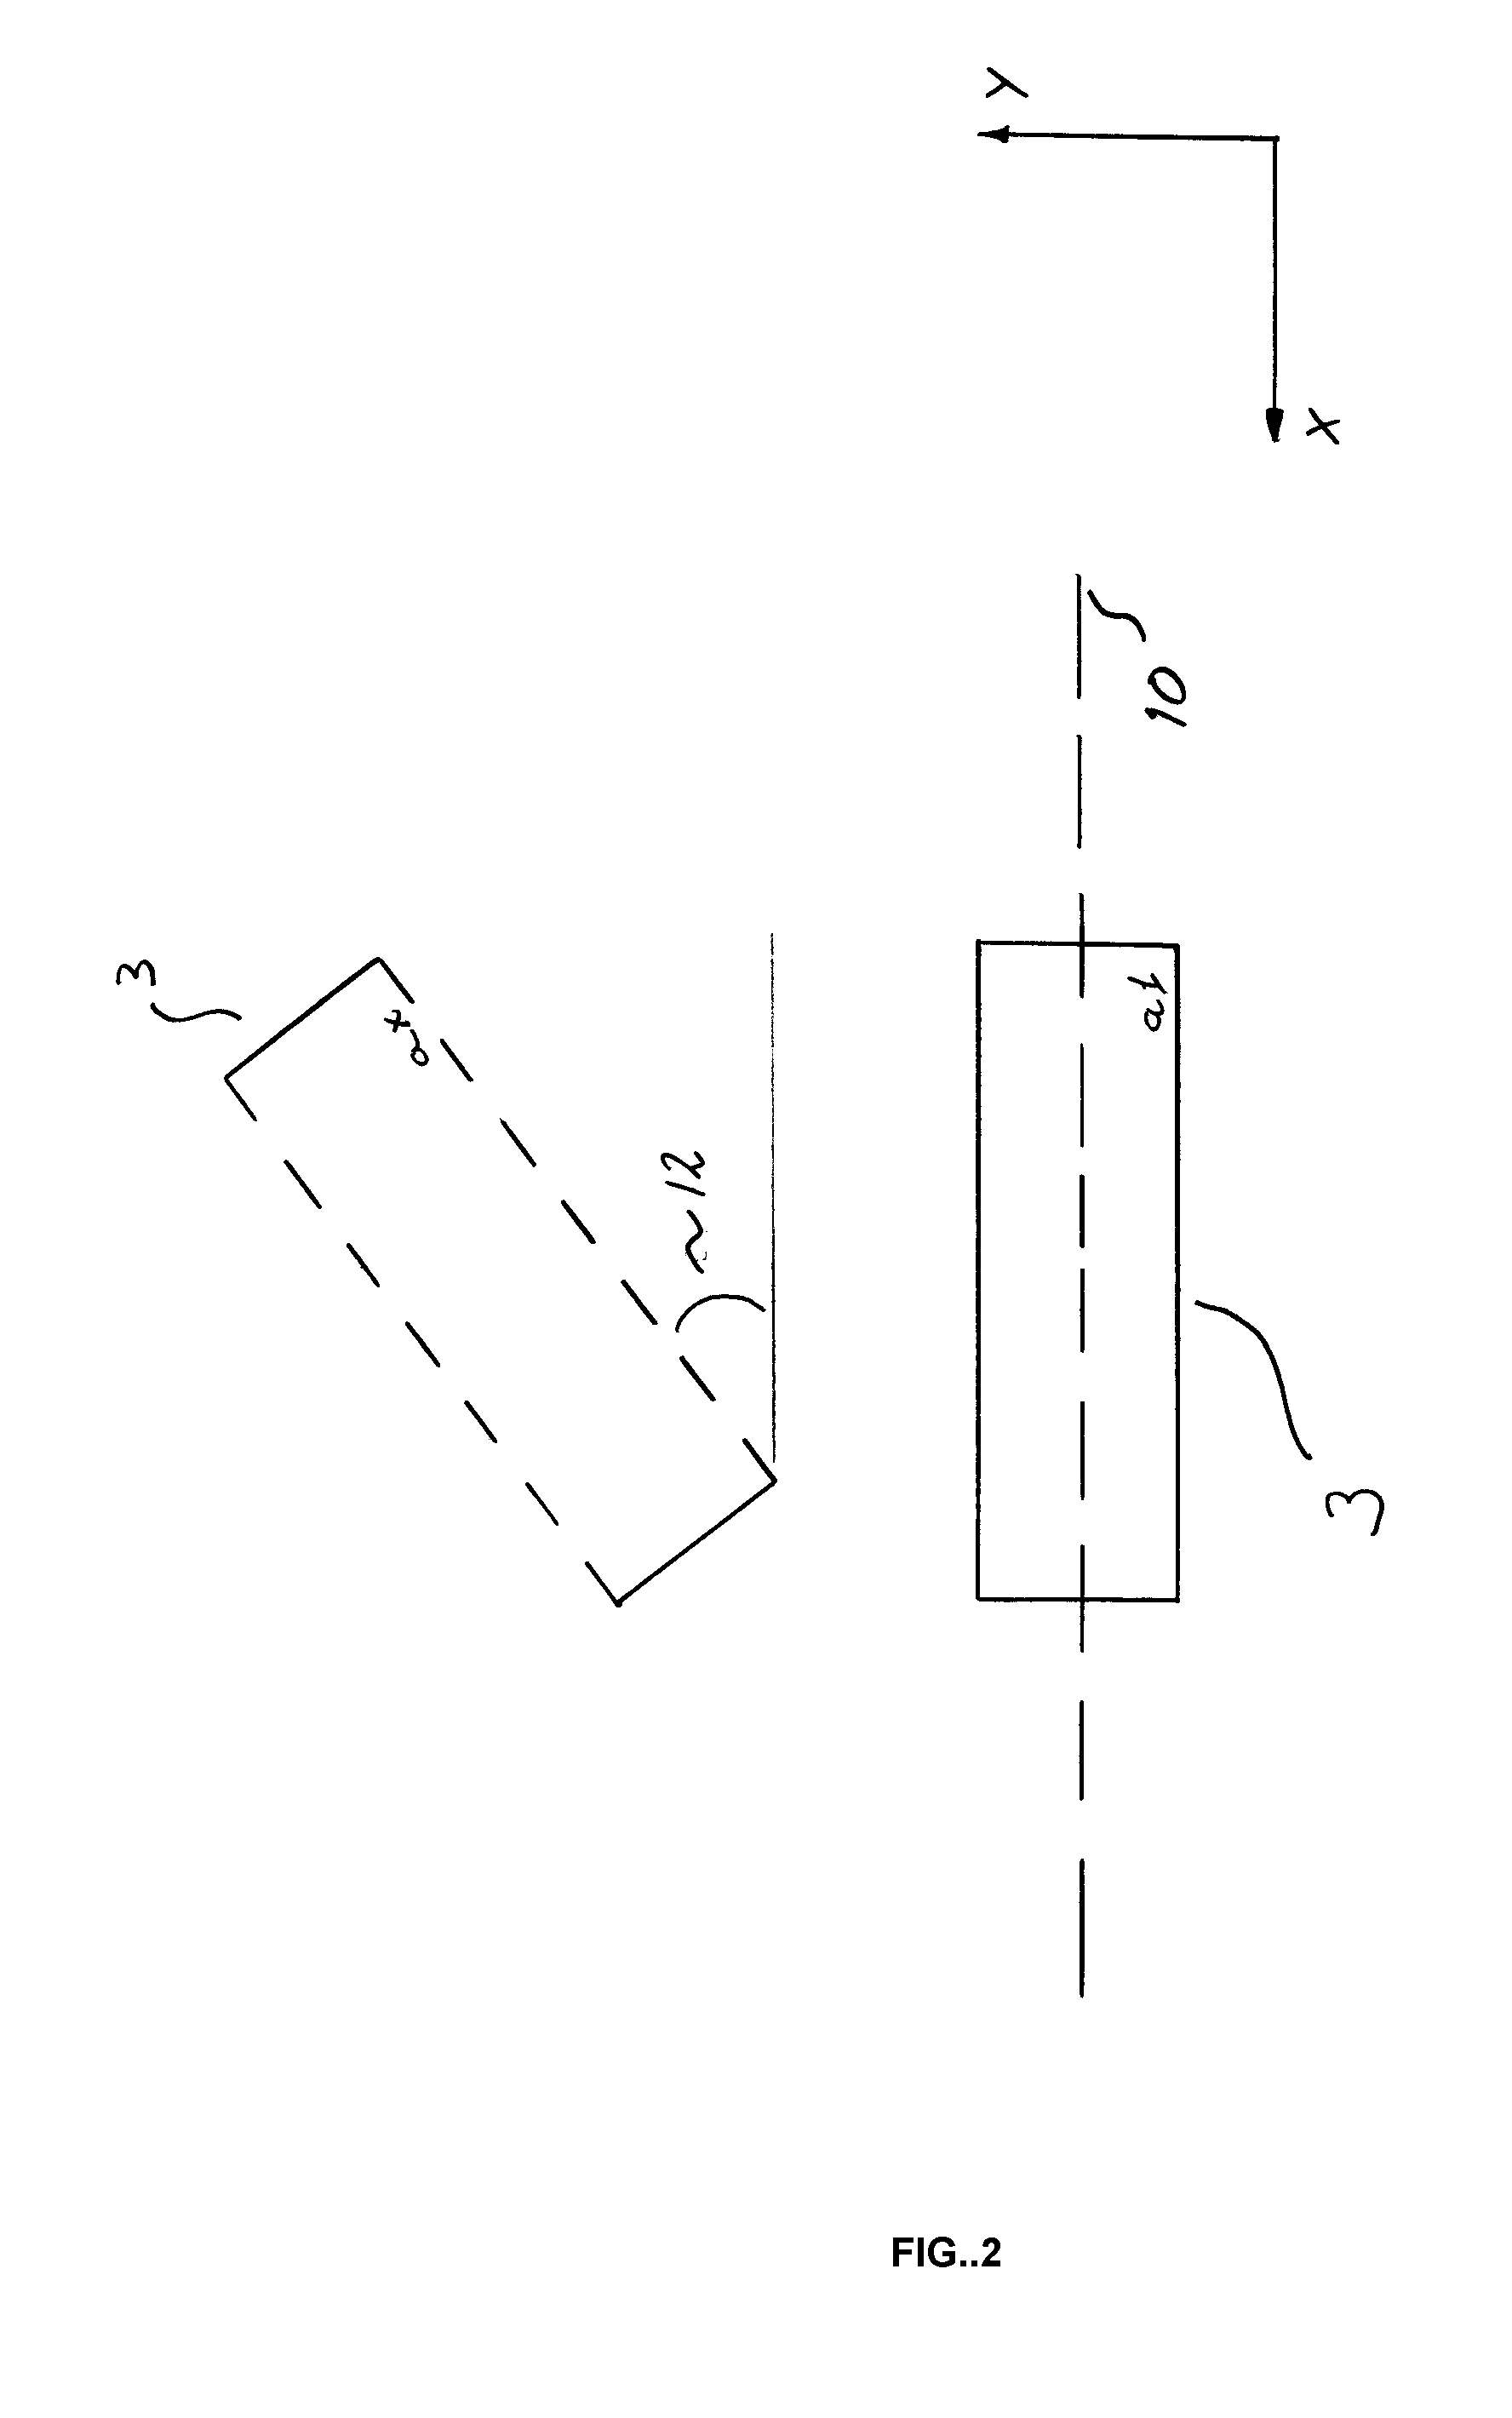 Device and Method for Calibrating the Center Point of a Tool Mounted on a Robot by Means of a Camera